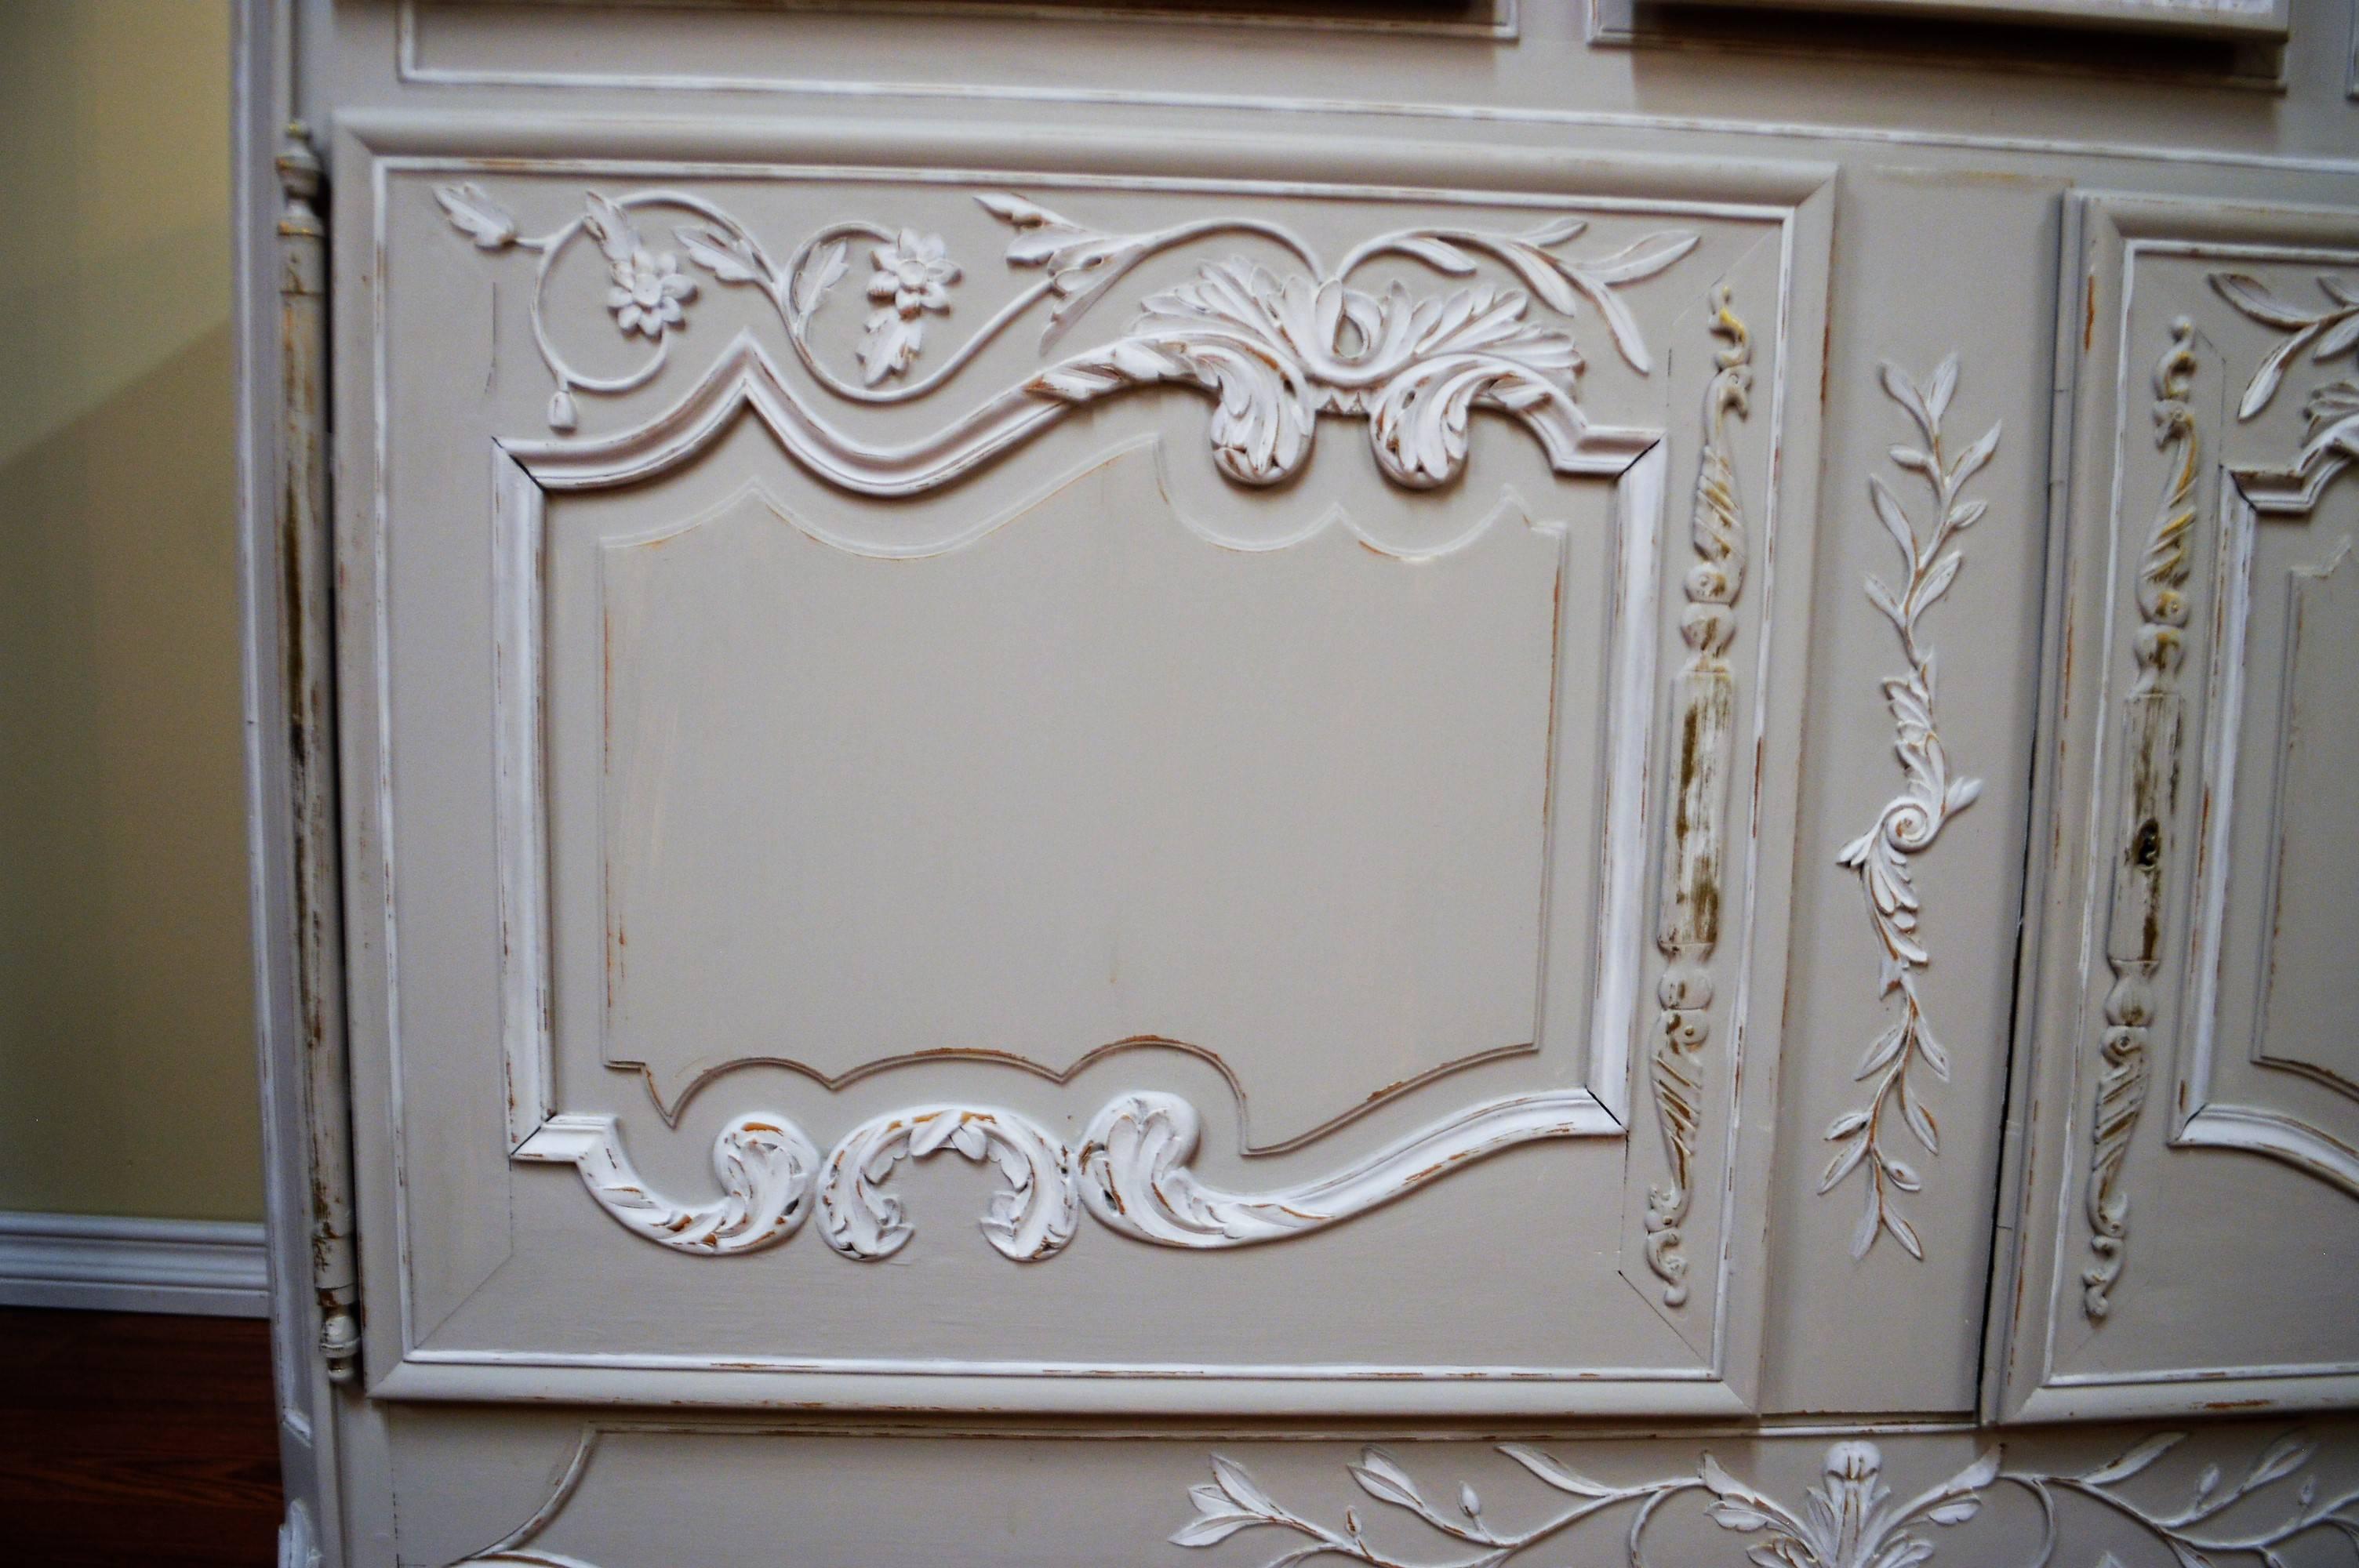 Louis XV style painted buffet or cabinet over solid cherry in a light grey with antique white details. There are three drawers and a large compartment for storage. One shelf will be added to the interior for storage.
All of the exterior details